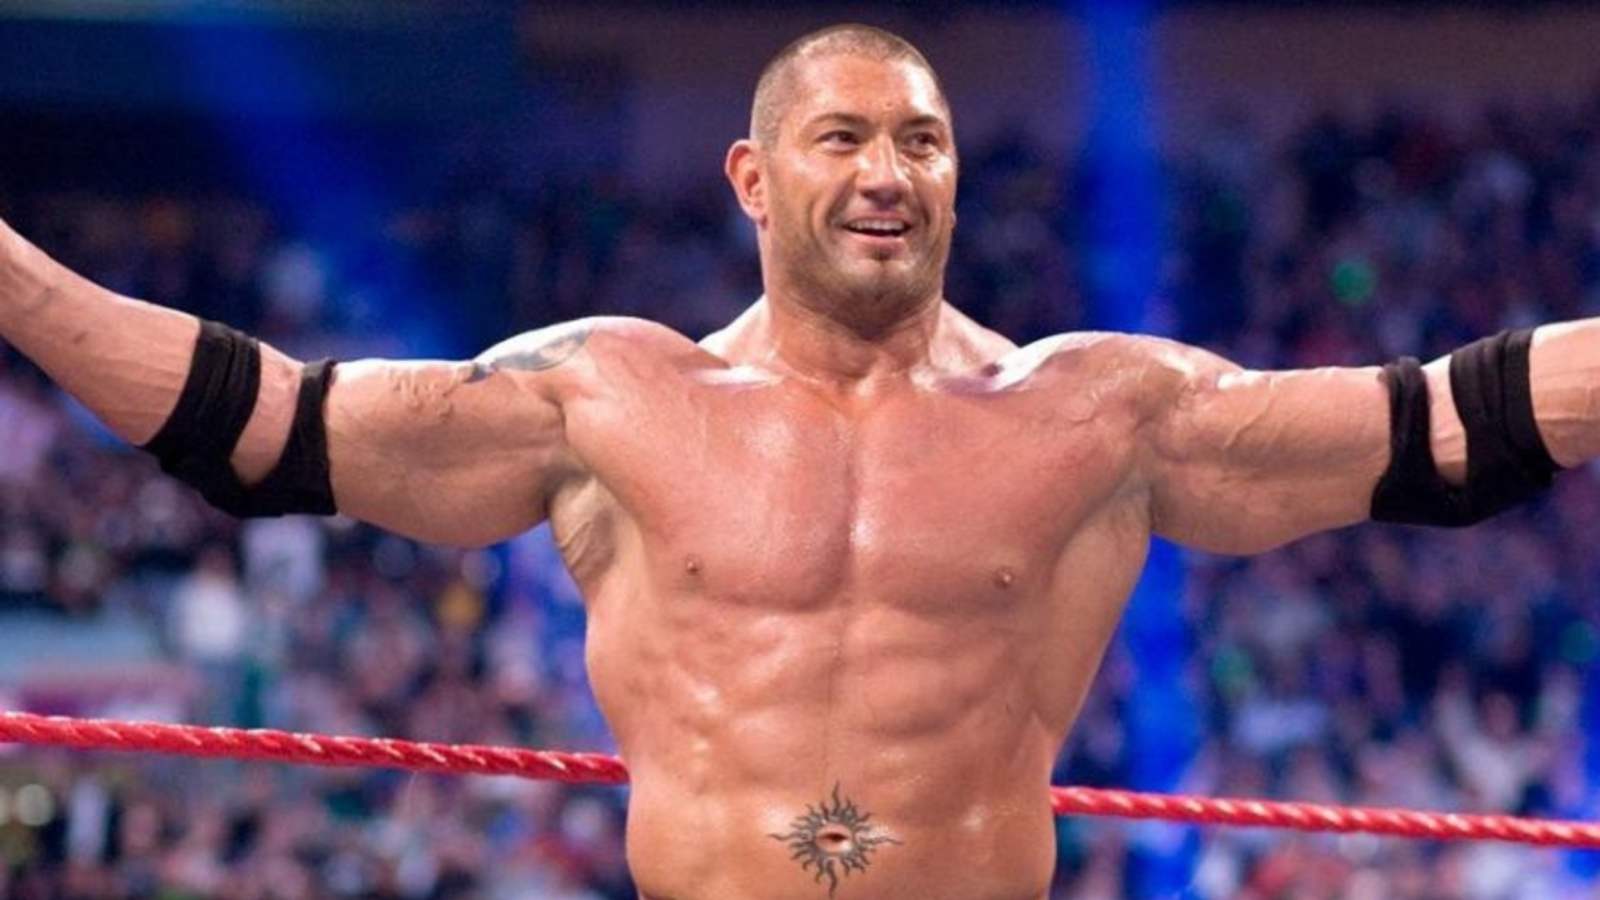 Dave Bautista Aims to Make Directorial Debut with First Film in 2025